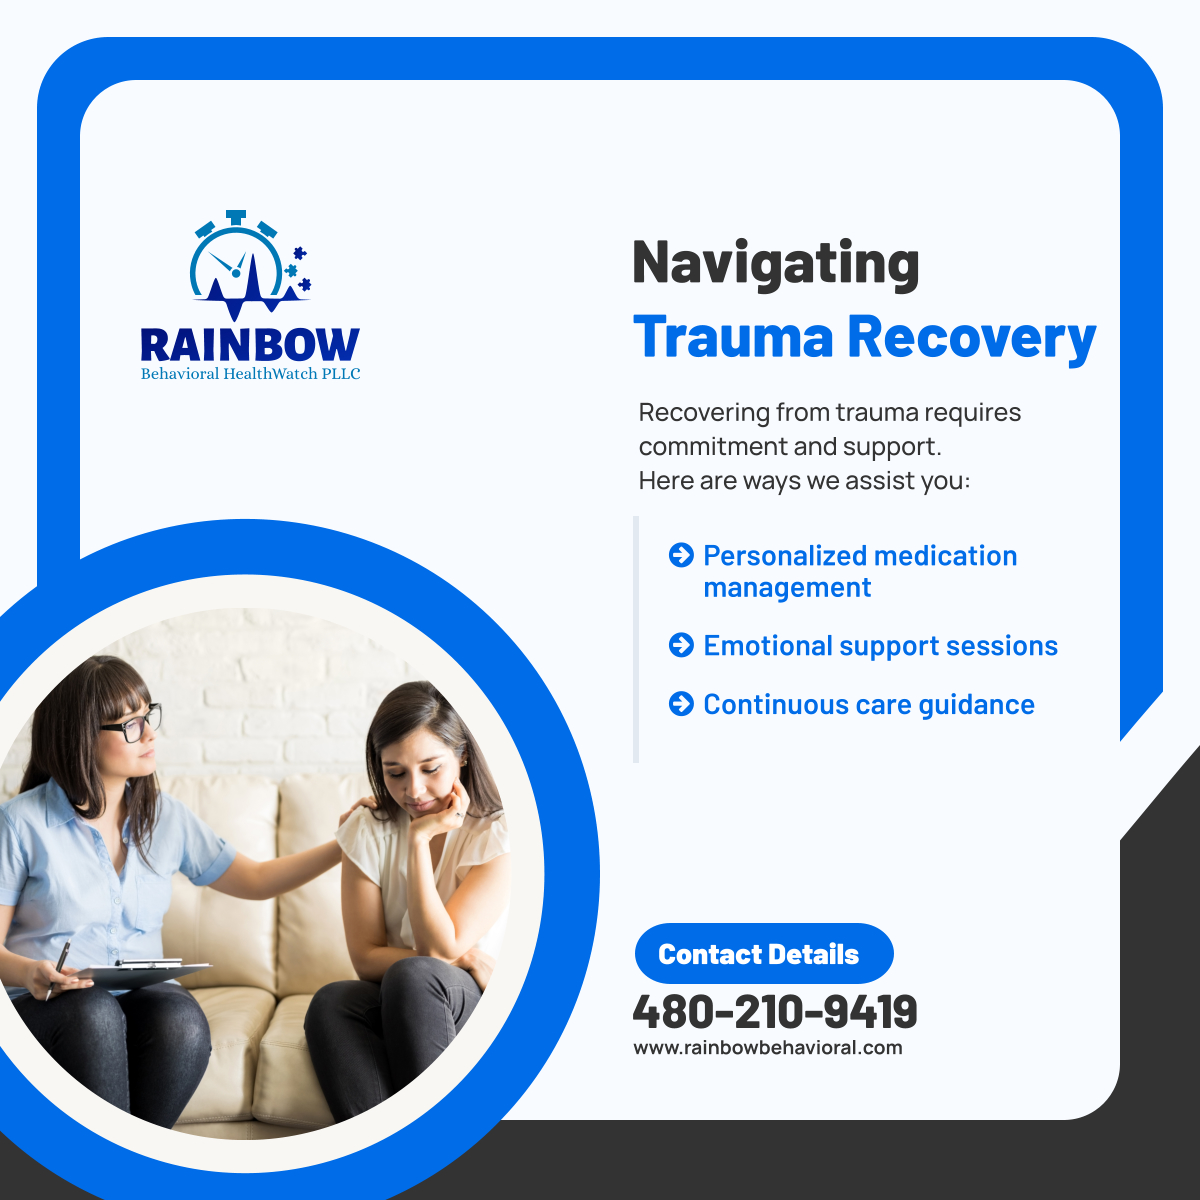 Begin your journey to recovery with our specialized support. We're committed to guiding you toward peace and resilience every step of the way. Your healing starts here.
 
#OroValleyAZ #PsychiatricTelehealth #TraumaRecovery #HealingJourney #SpecializedSupport